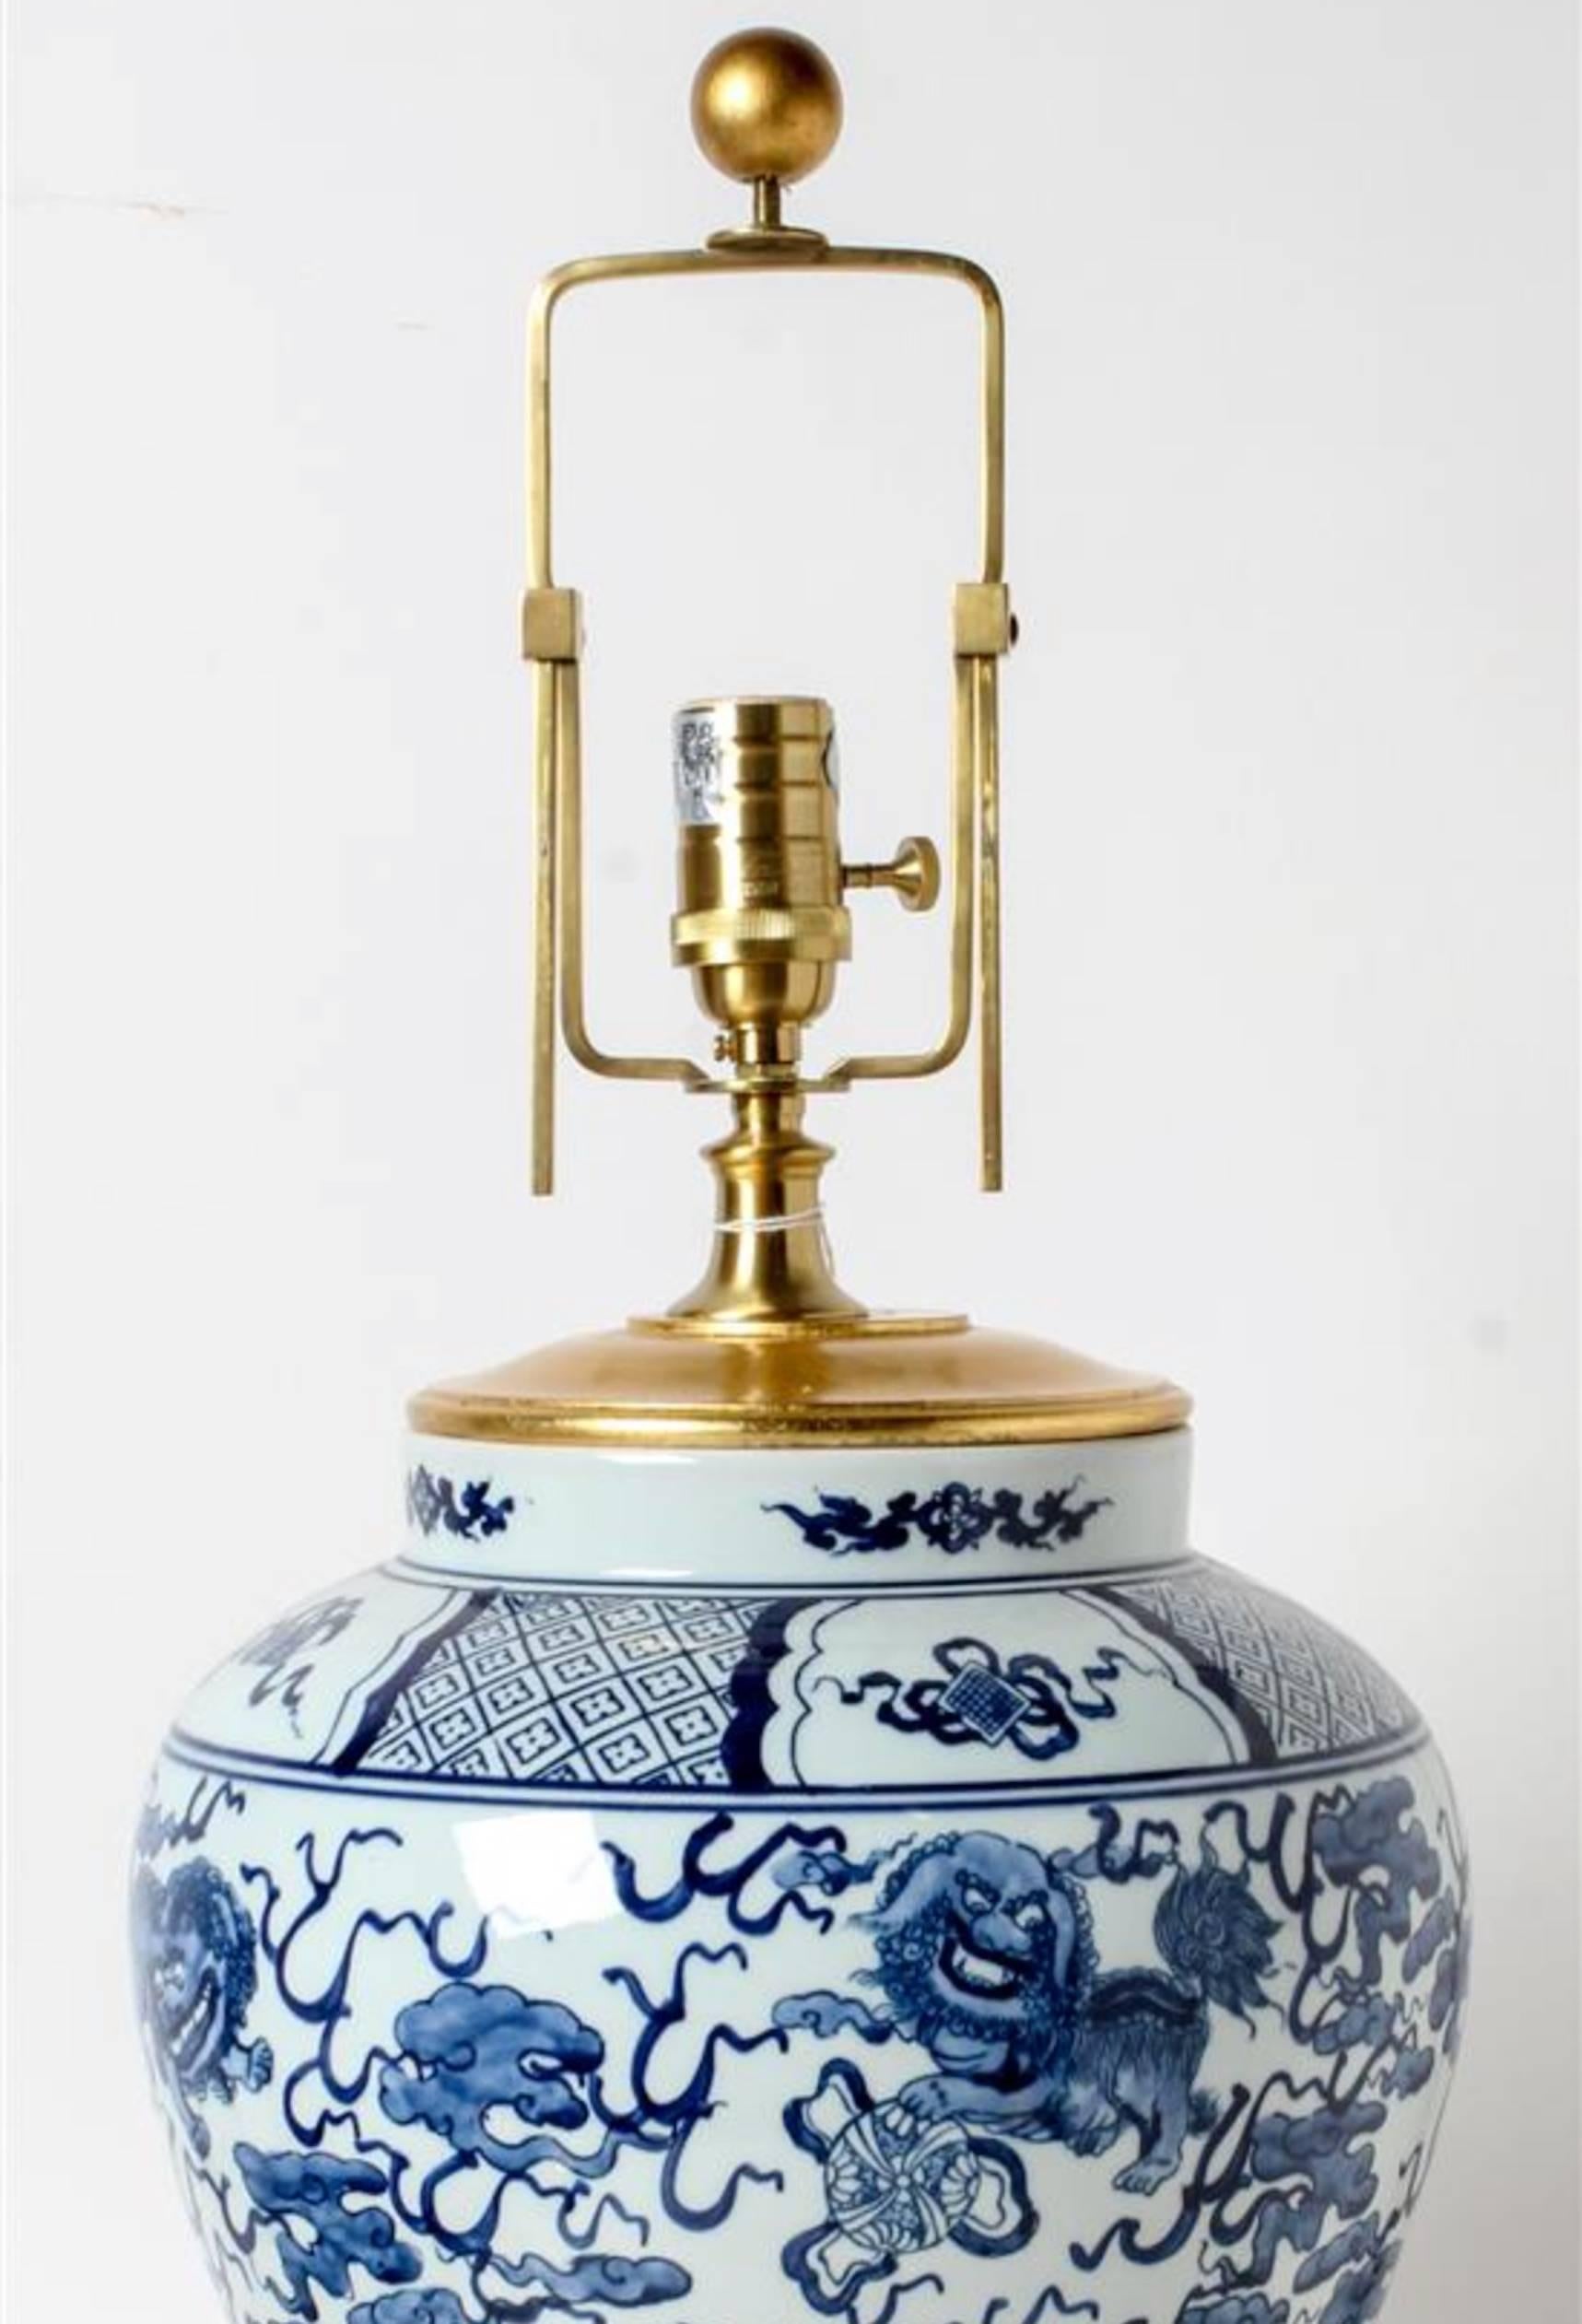 Exceptional blue and white vase on giltwood base mounted as lamp. Timeless Ralph Lauren.  We also have a large collection of blue and white porcelain.  Feel free to call or email with questions.